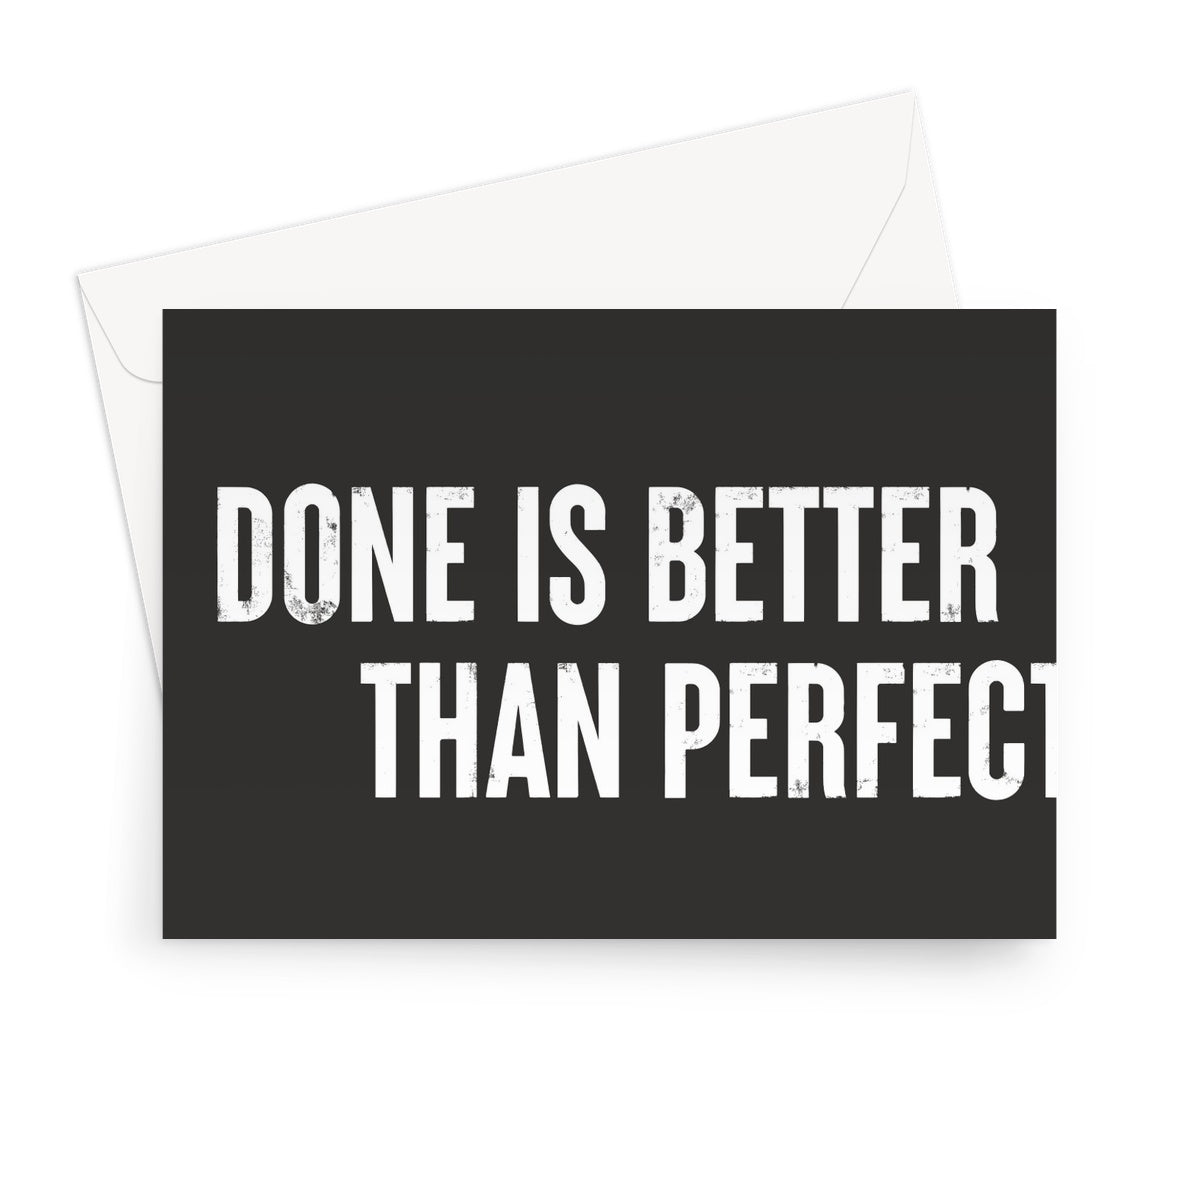 DONE IS BETTER - Black/White Greeting Card